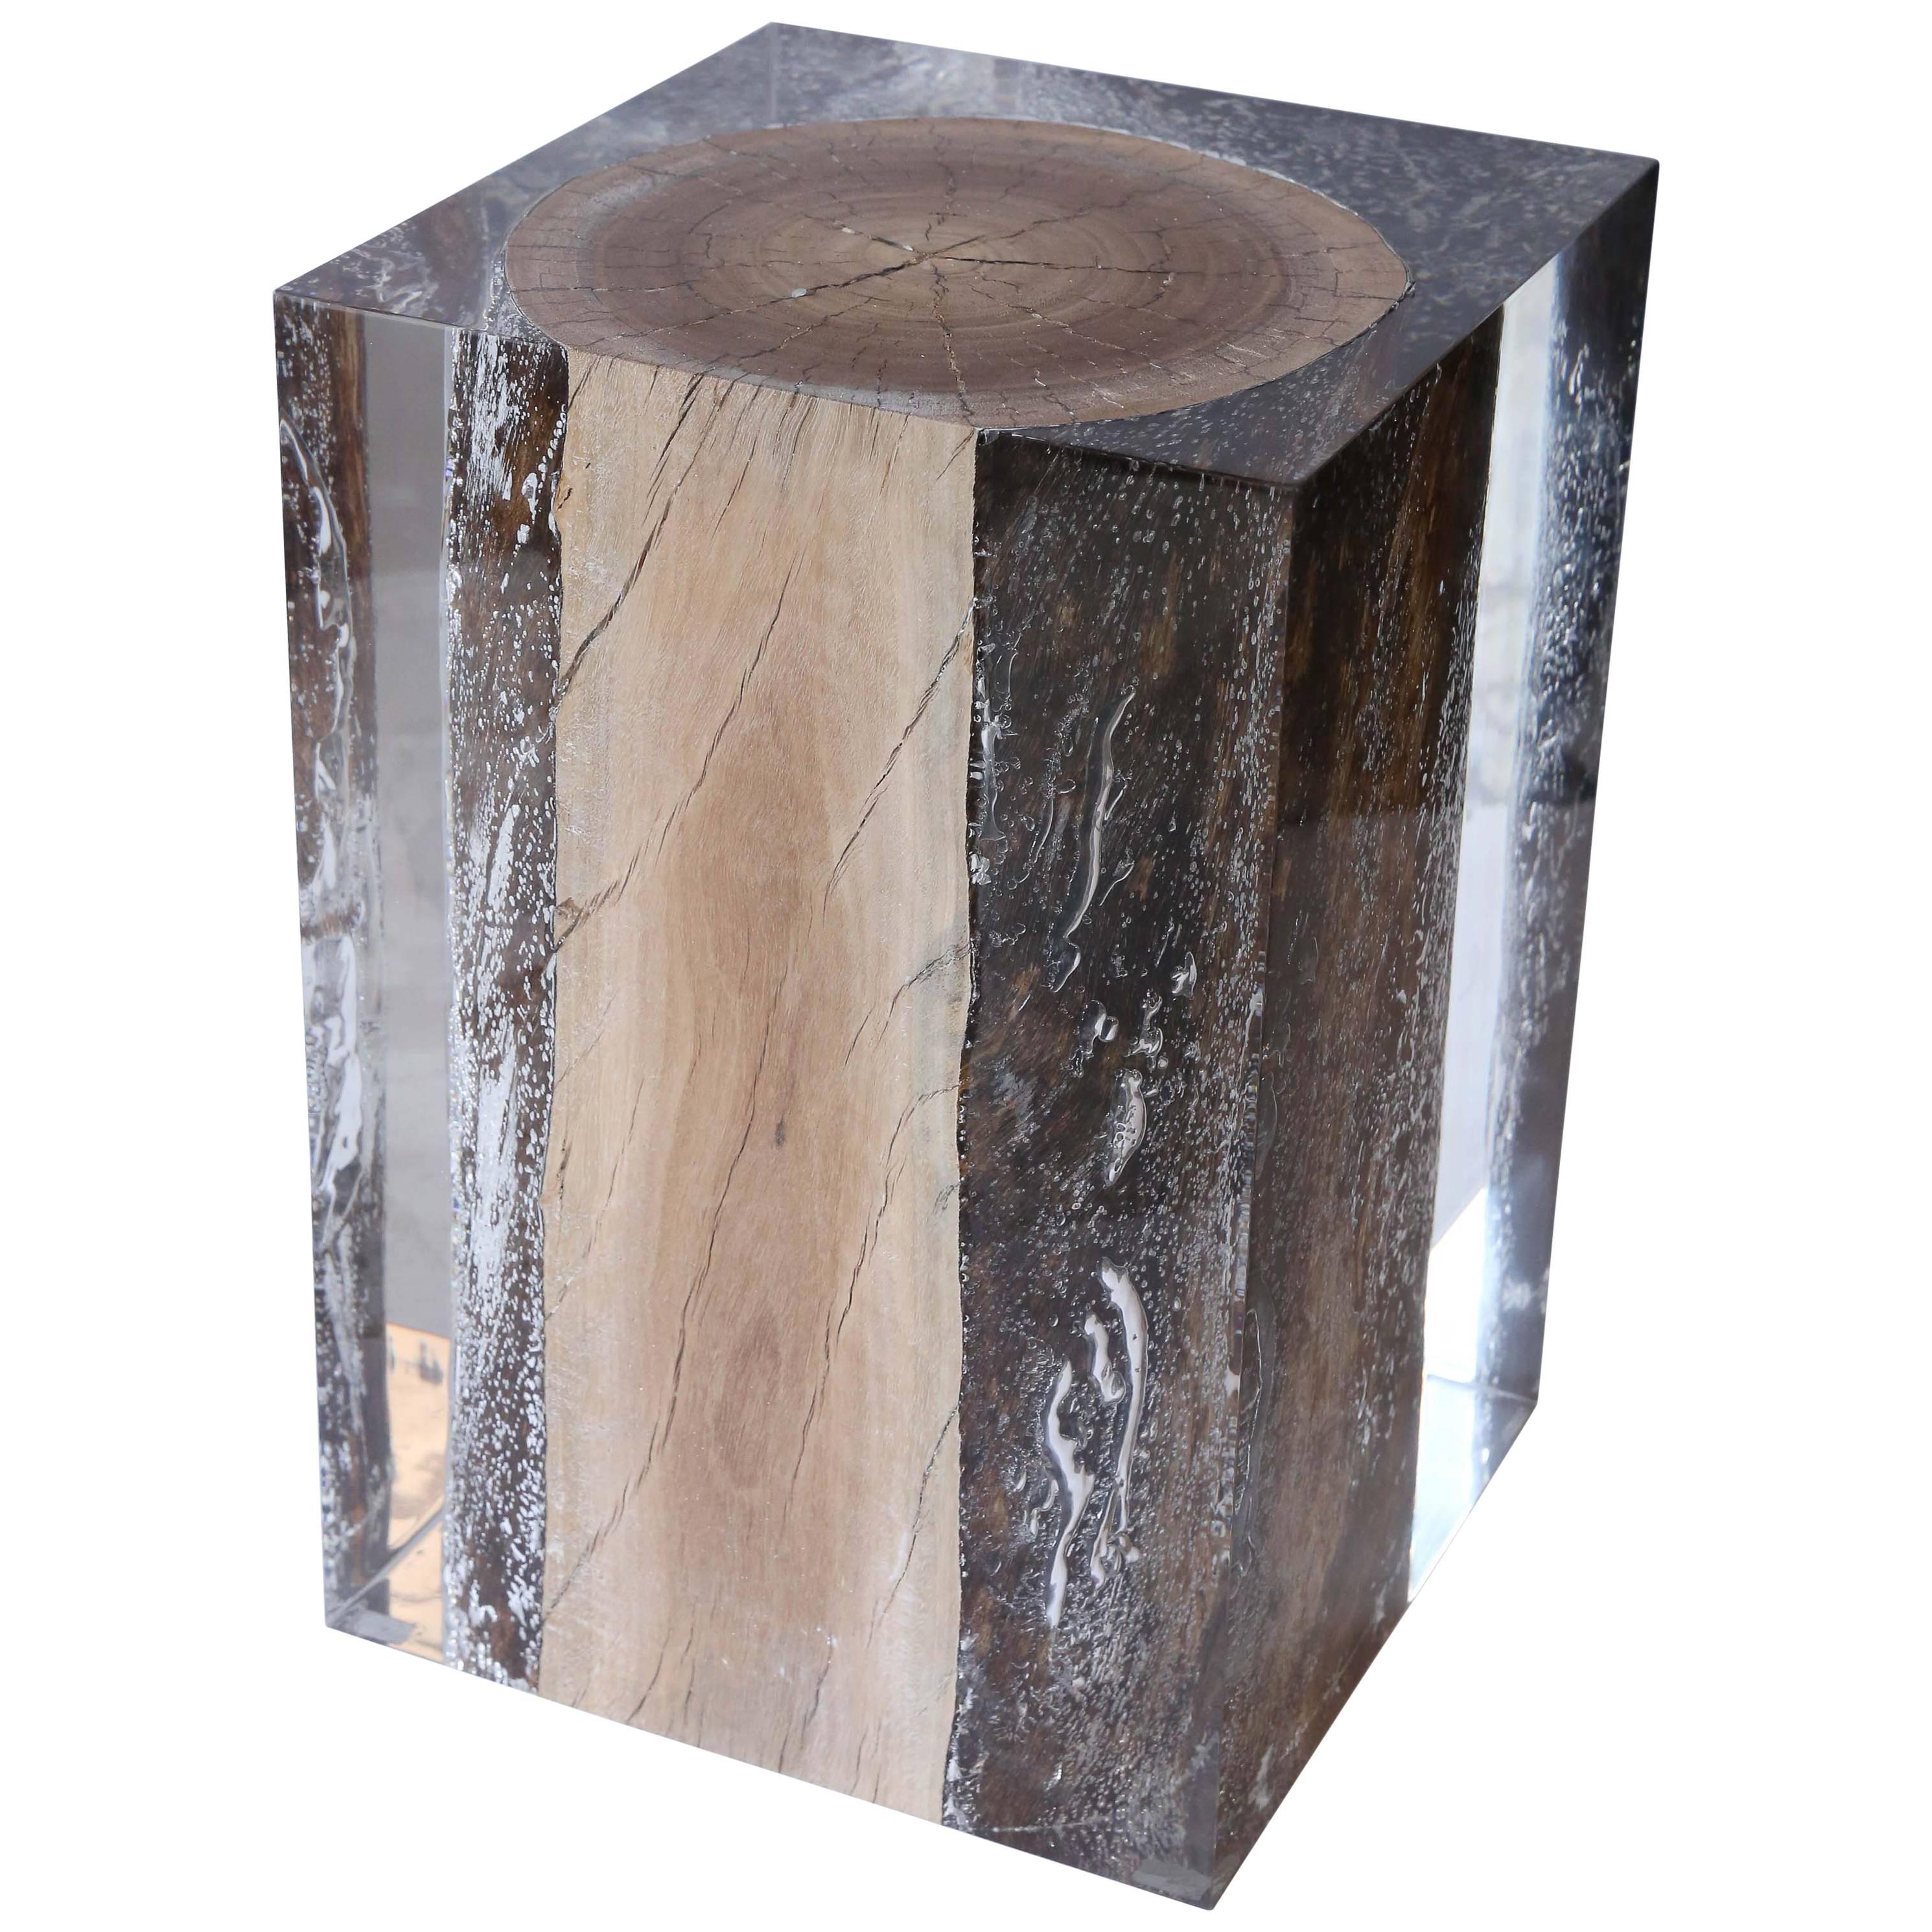 Acrylic Glass and Driftwood Nilleq Side Table and Stool